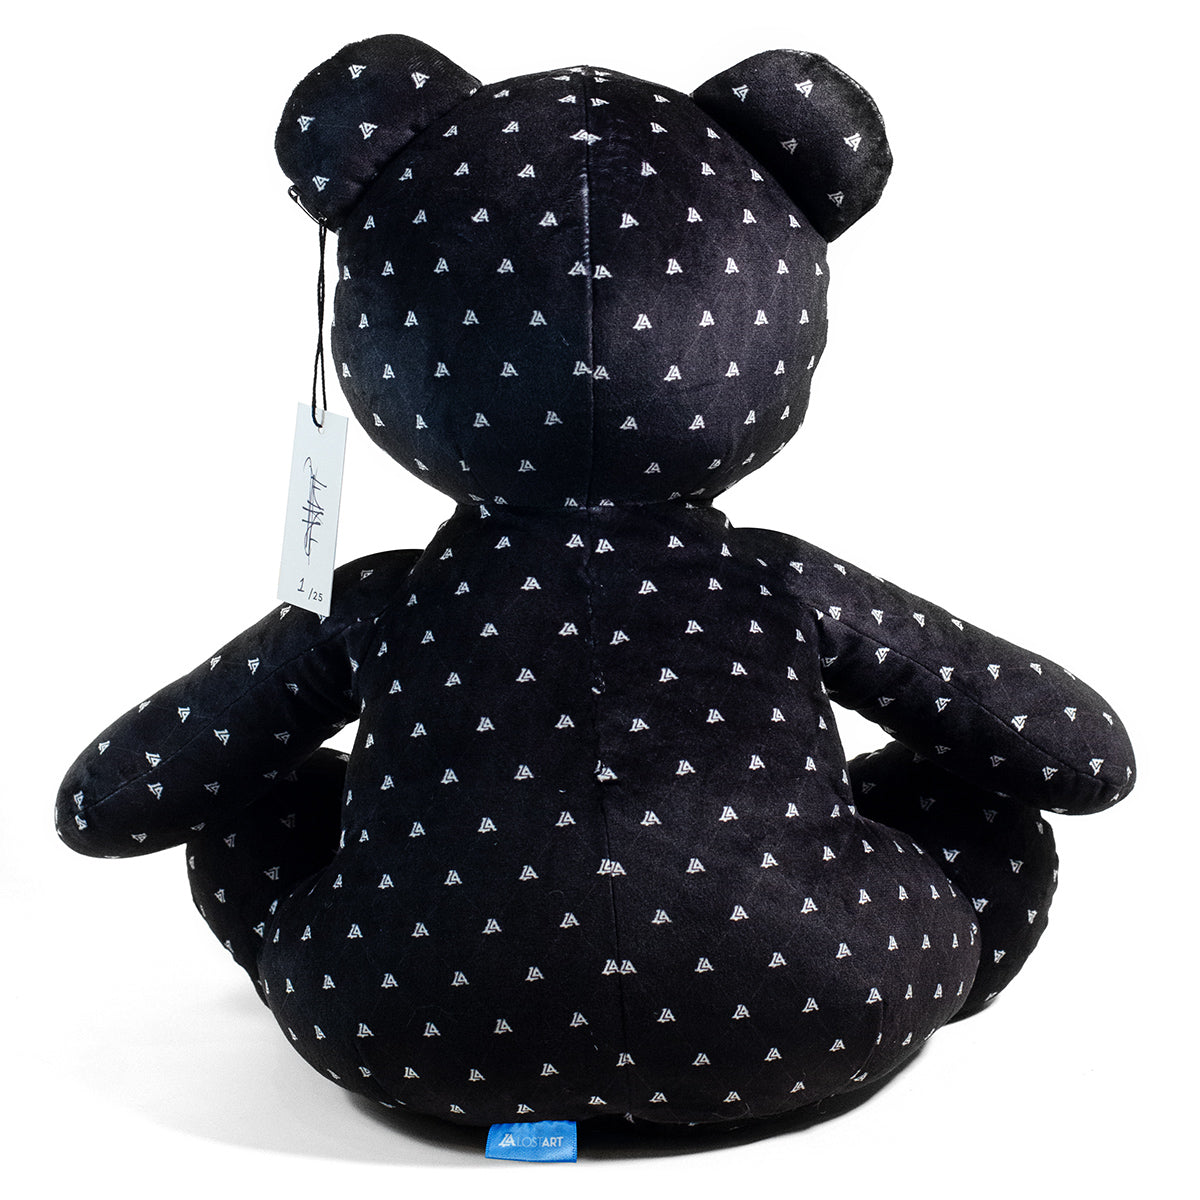 Lost Art Canada - black white patterned teddy bear back view